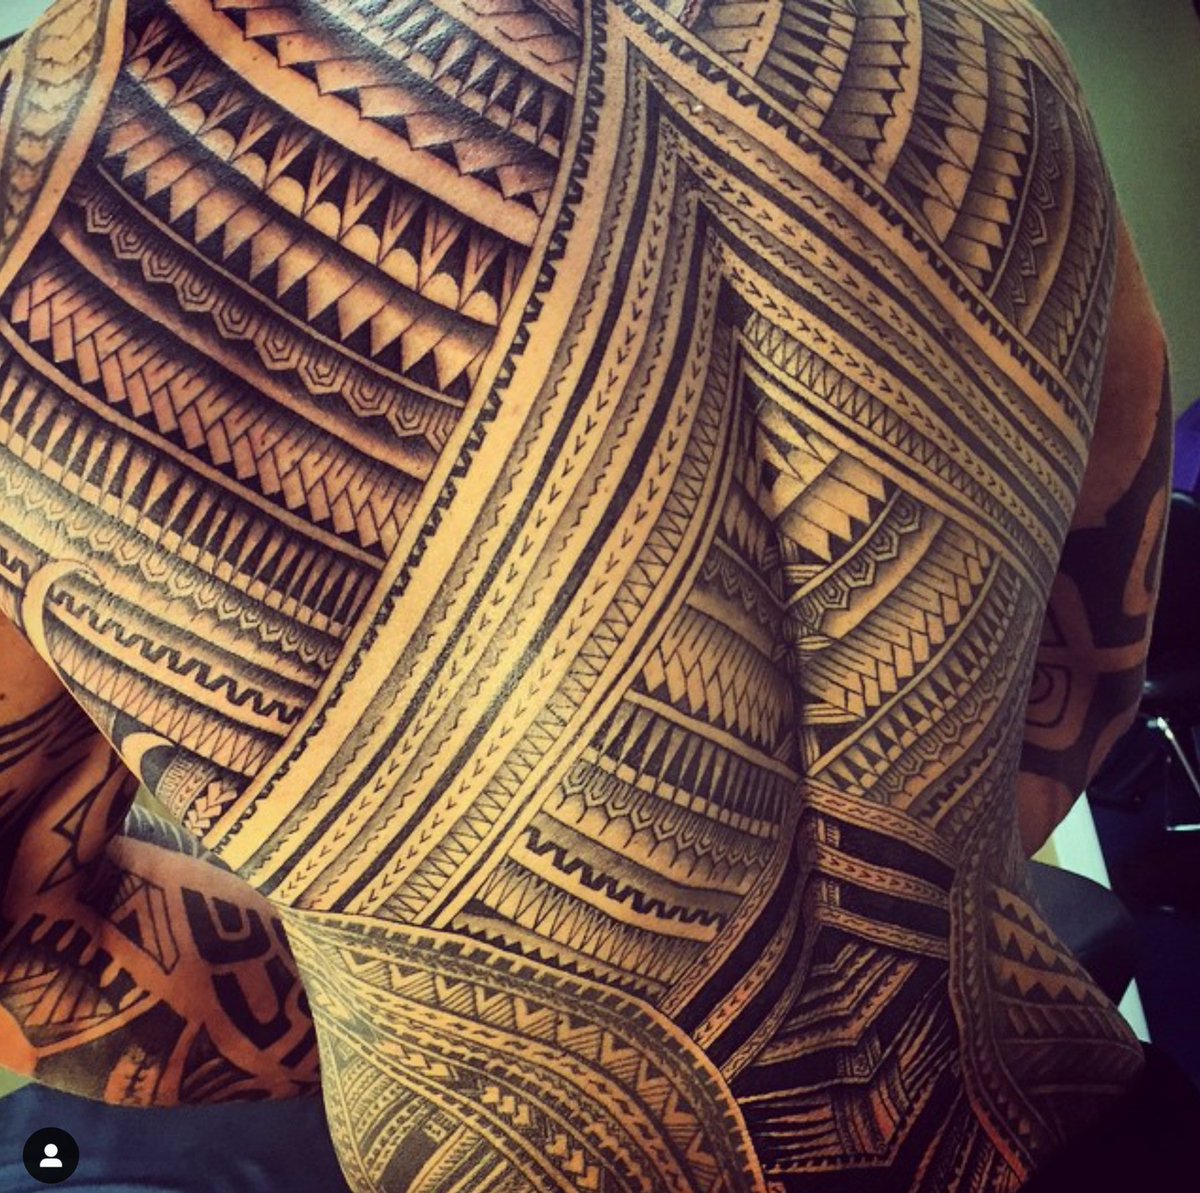 My fav tatau by Michael Fatutoa (Tampa, Florida) https://www.instagram.com/samoan_mike/ Always loved his line work, always so clean. His animal tatau are just on another level! 